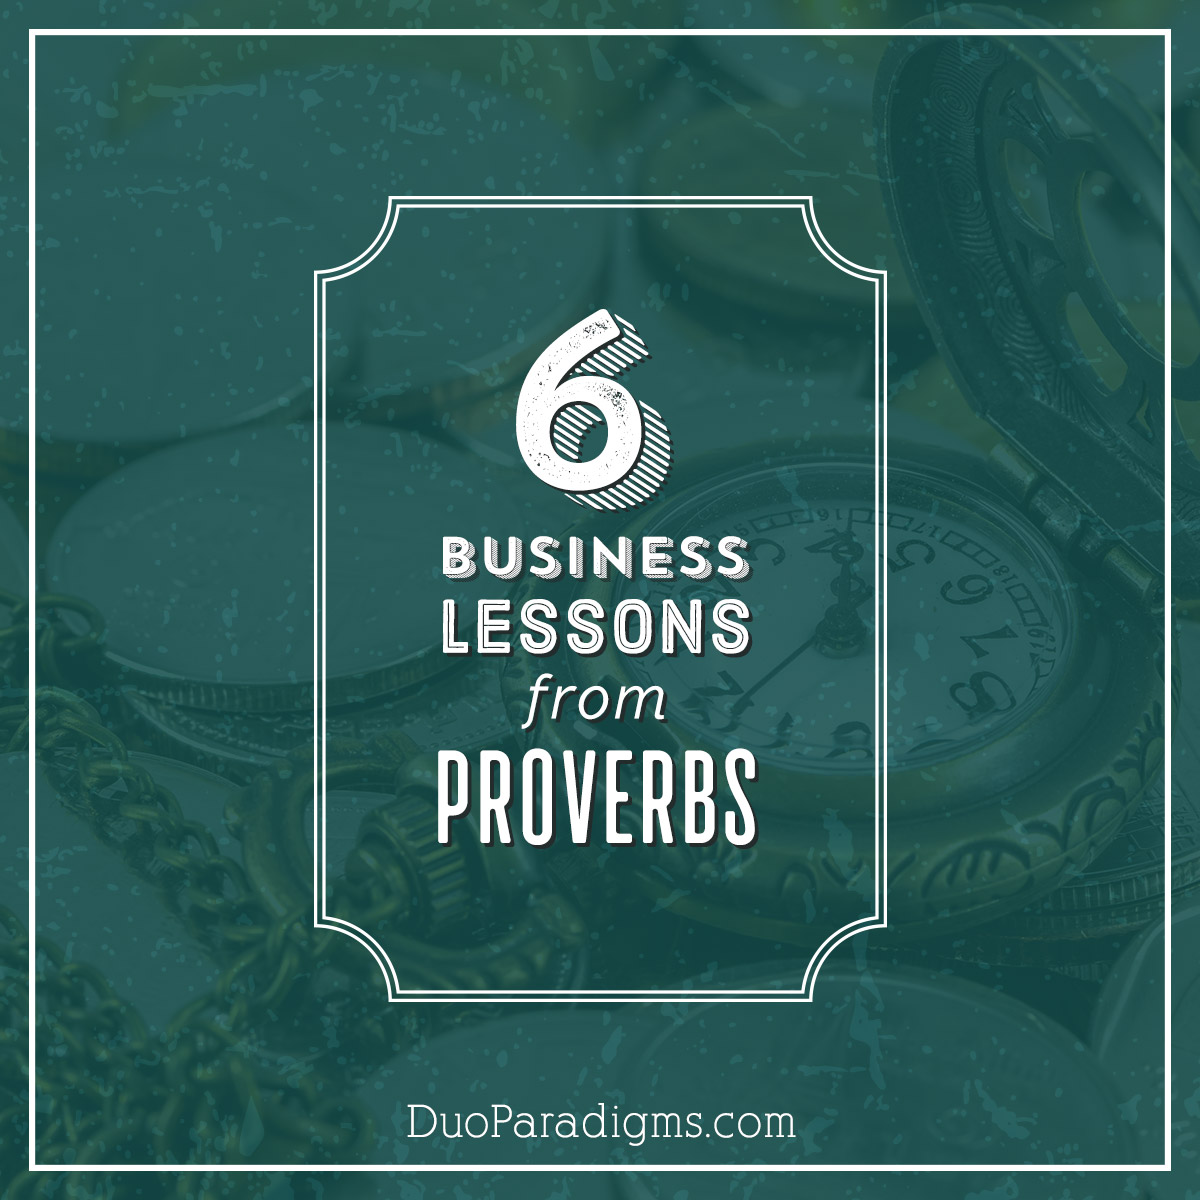 6 Business Lessons from Proverbs